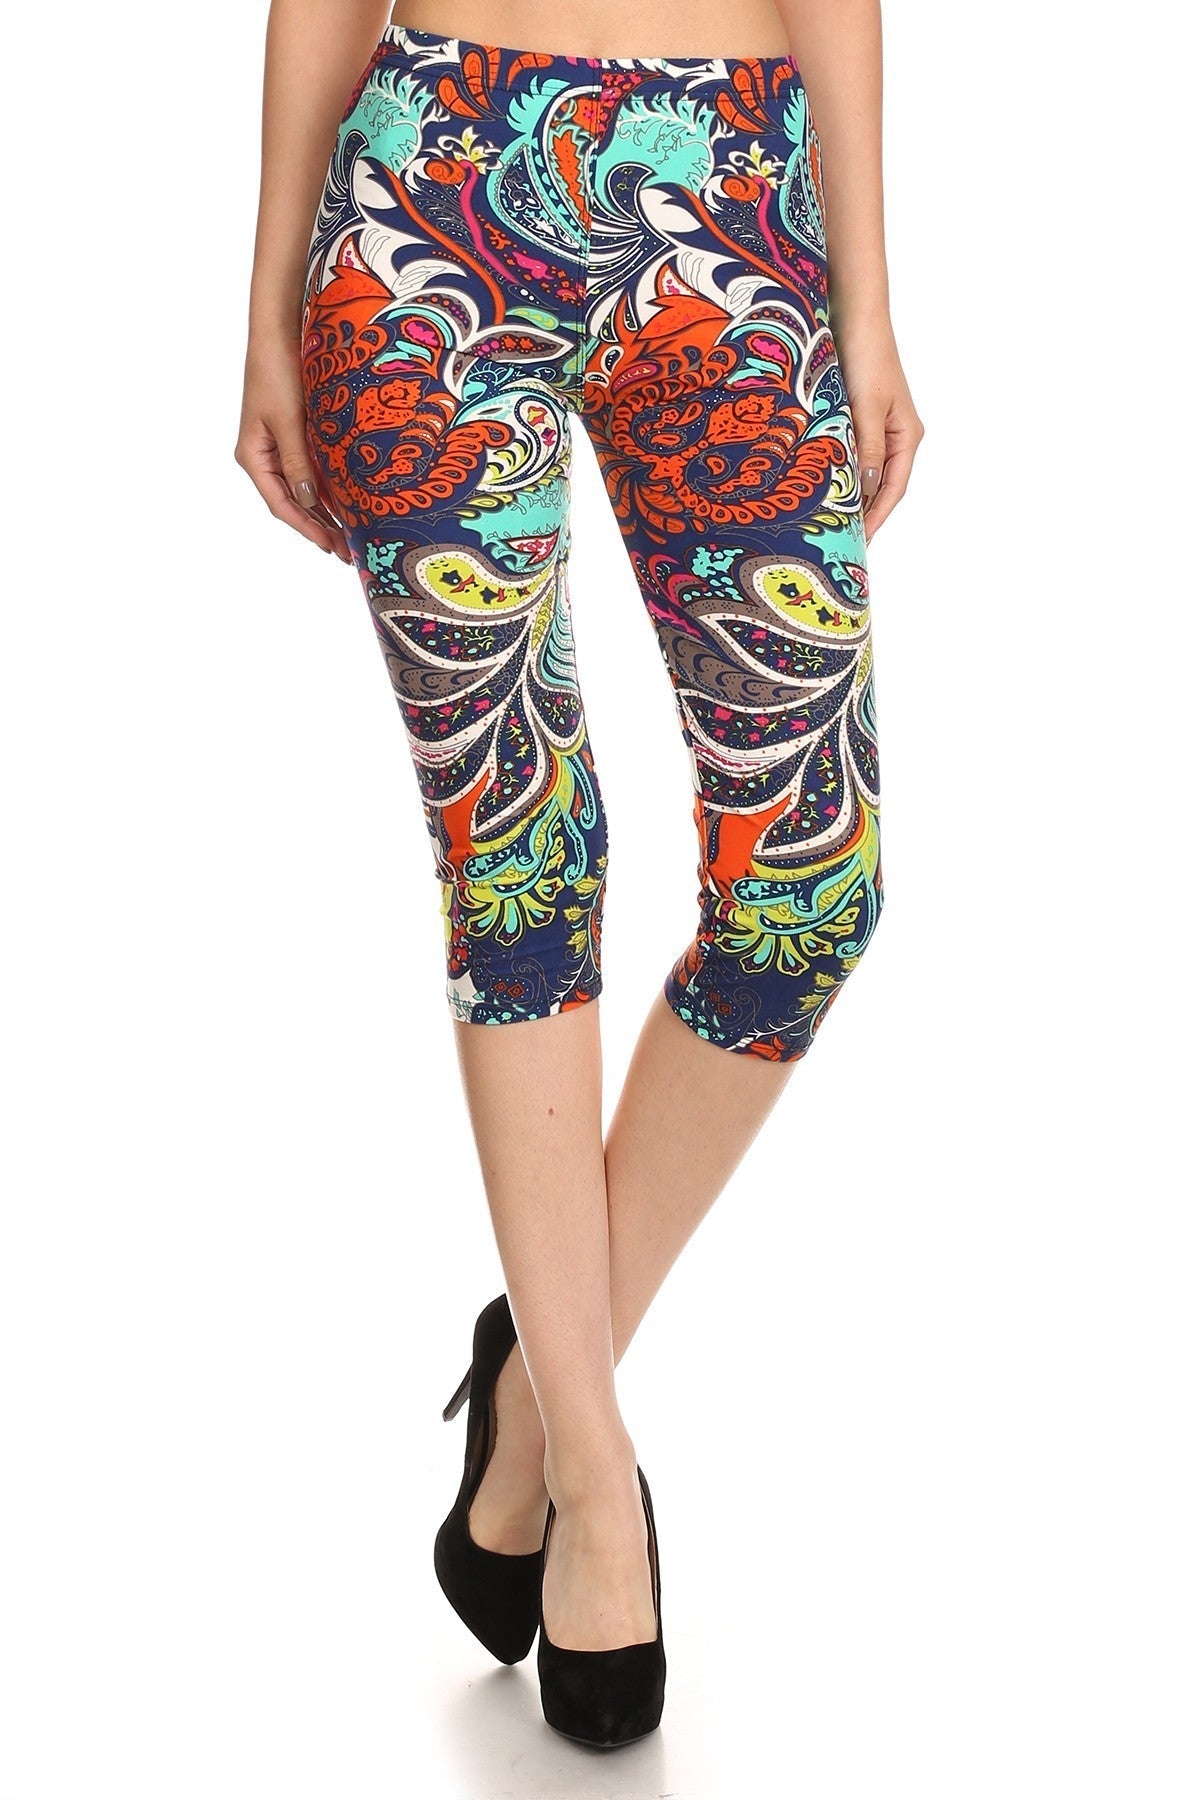 Multi-color Ornate Print Cropped Length Fitted Leggings With High Elastic Waist. Bottoms jehouze 